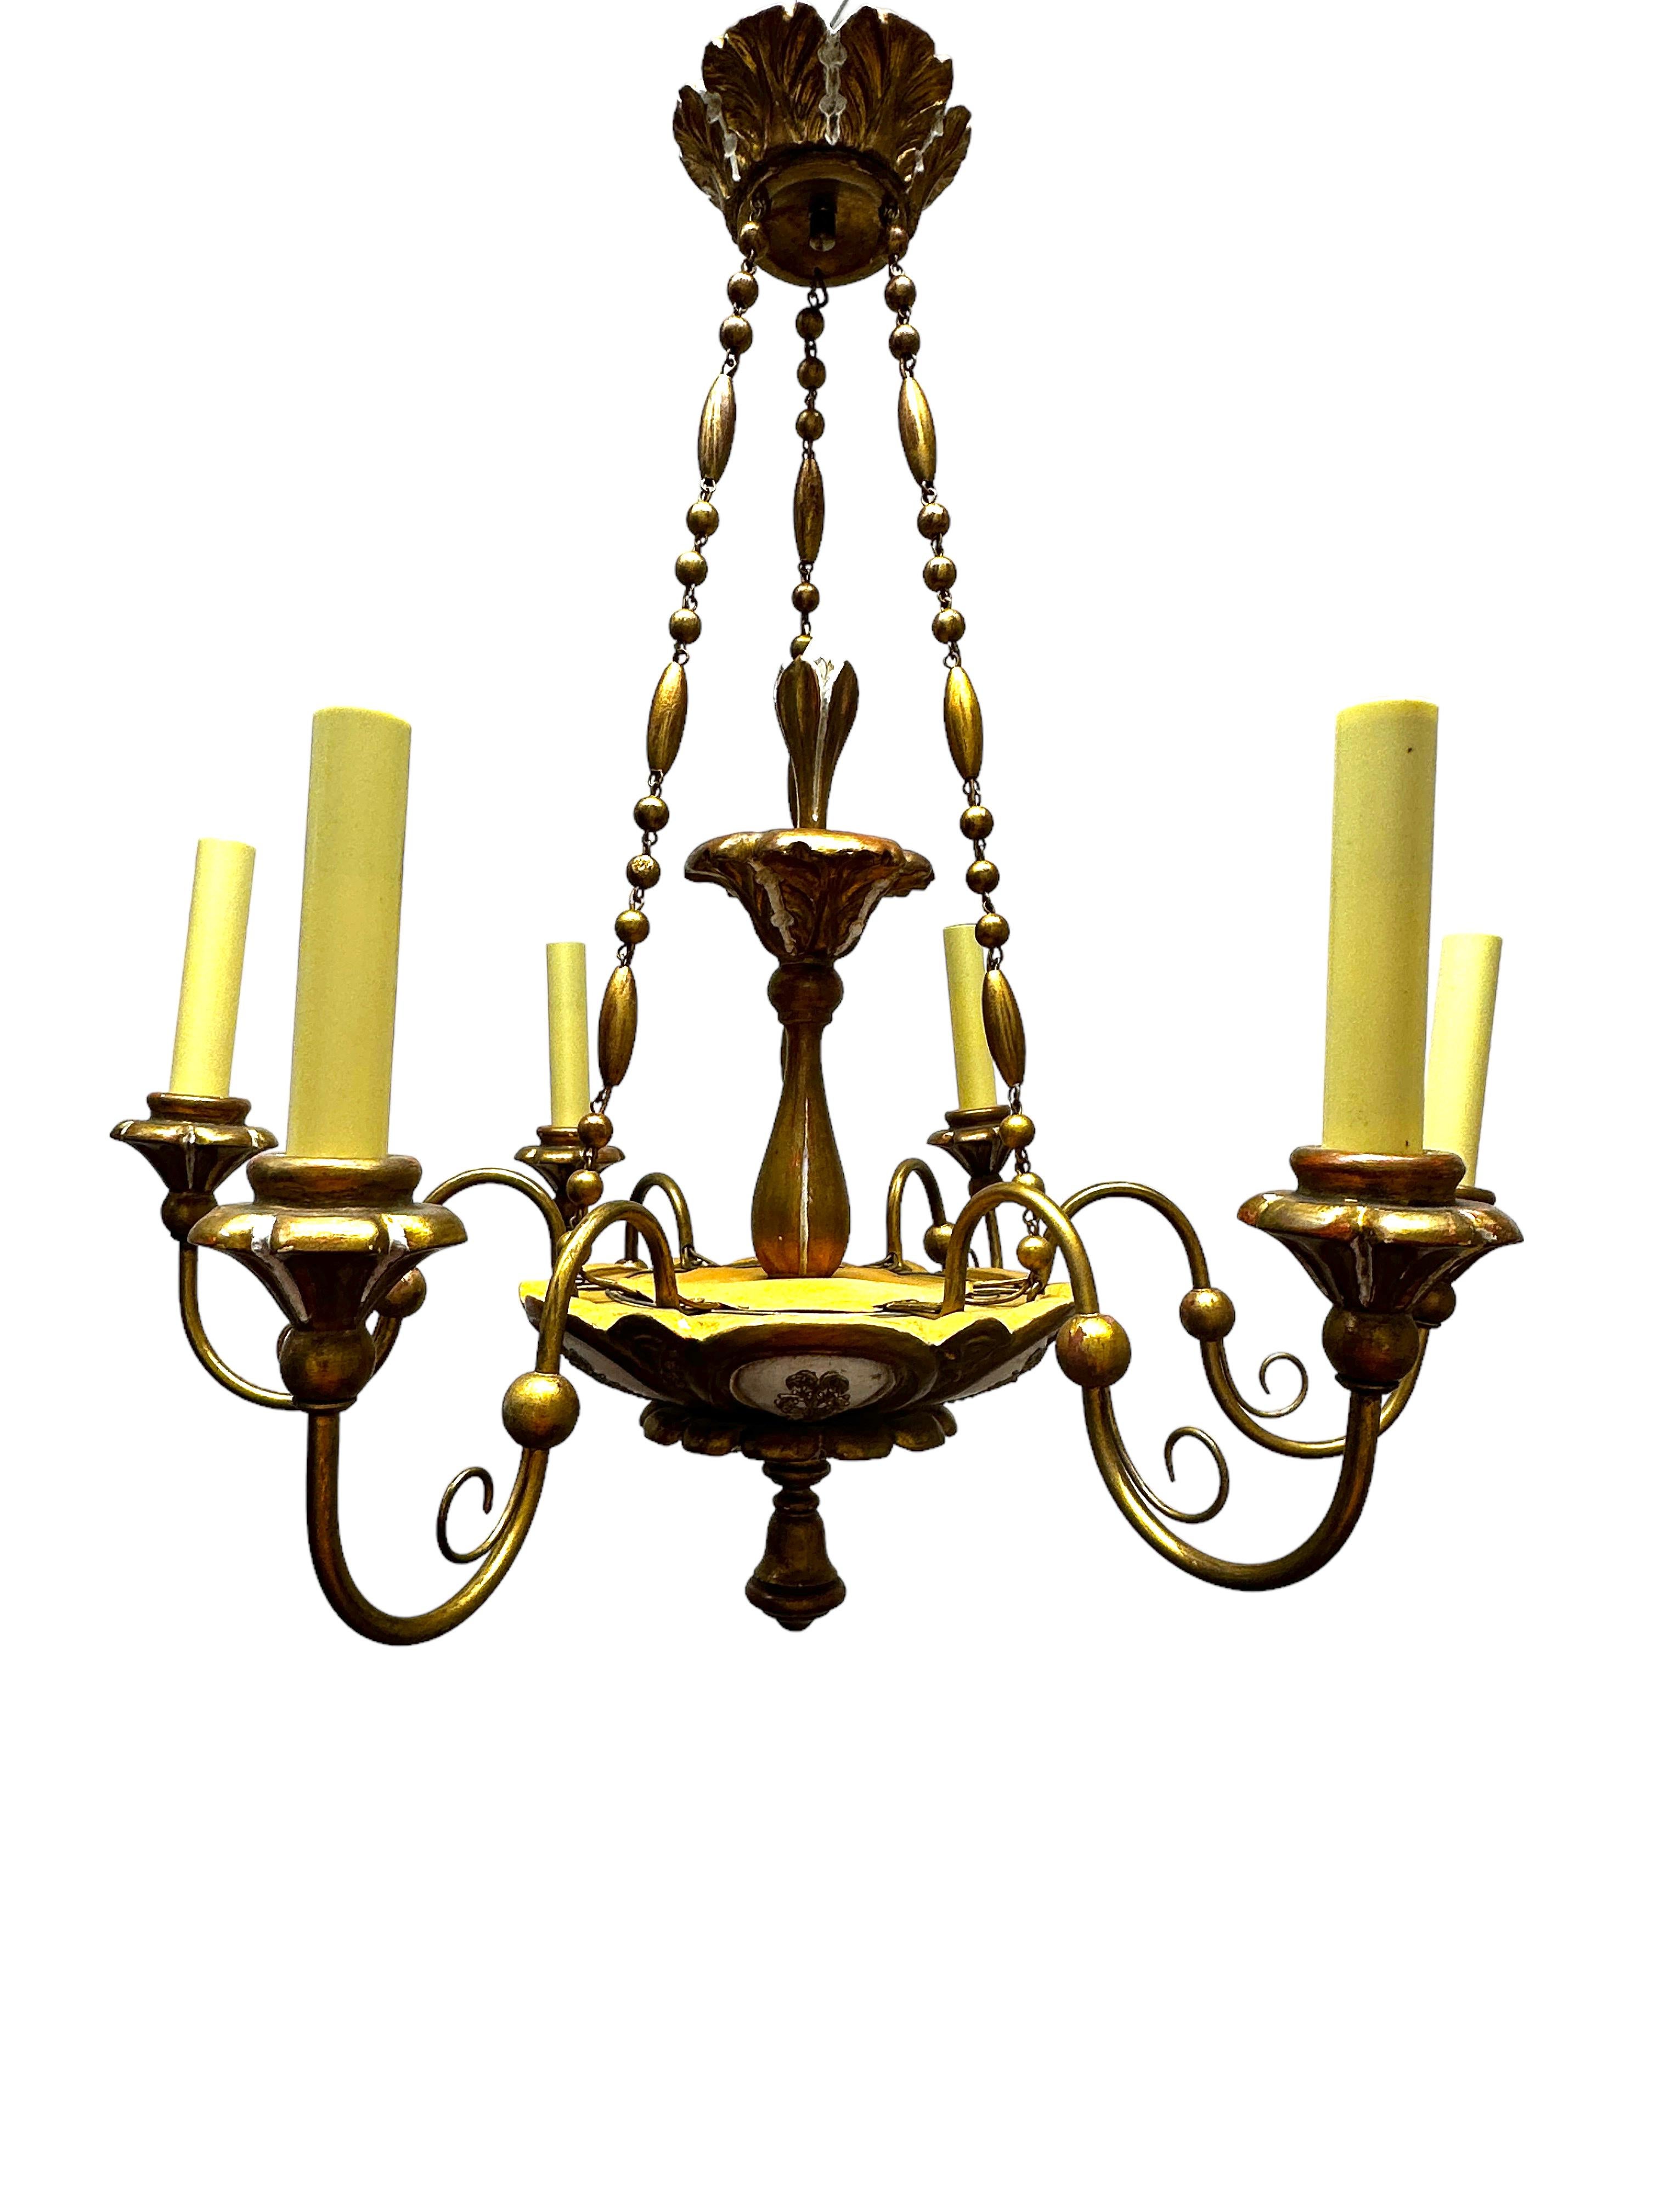 Add a touch of opulence to your home with this charming chandelier! Perfect chippy white, gilt wood and hand carved chandelier to enhance any chic or eclectic home. We'd love to see it hanging at a dinning place as a charming welcome. The chain with